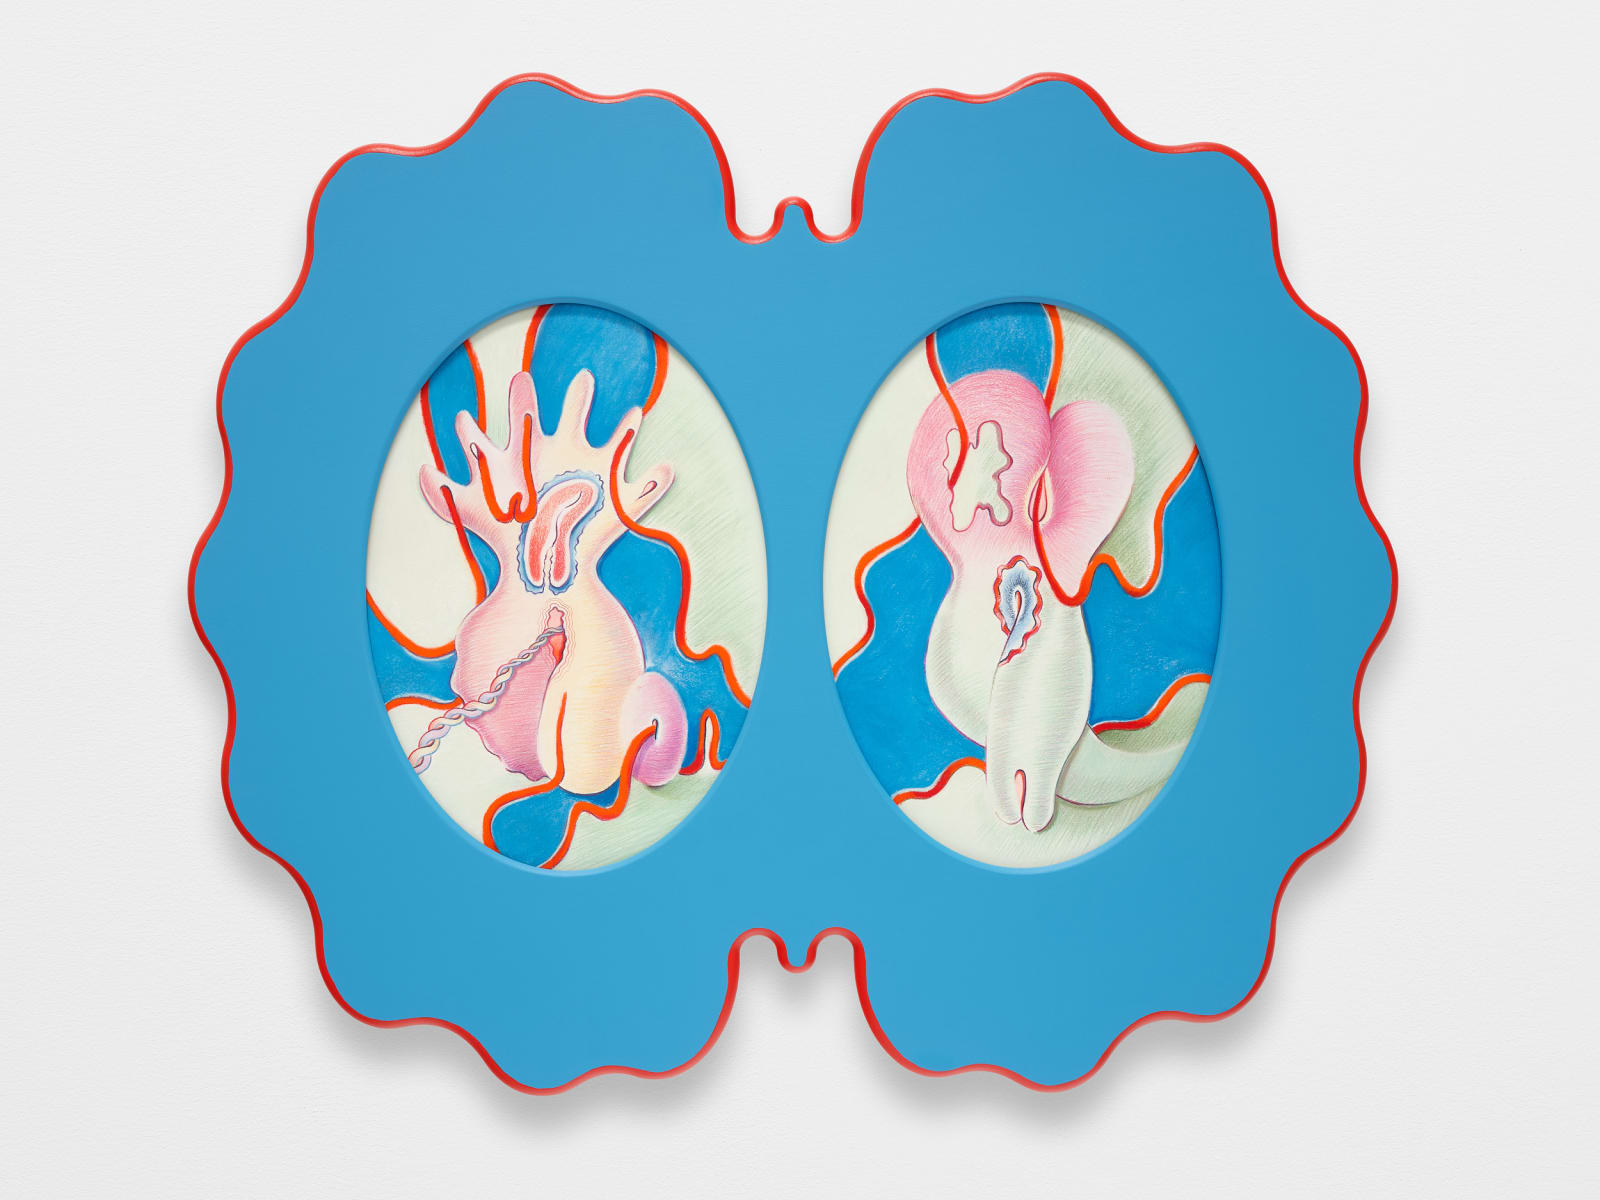 Pastel drawing showing braided umbilical cord penetrating a six- fingered shell while its twin’s upper lobe bears a<br>butterfly-shaped hole. The light blue and symmetrical curved<br>custom artist’s frame with bright orange outline is reminiscent<br>of bodily forms that are distinctly female.